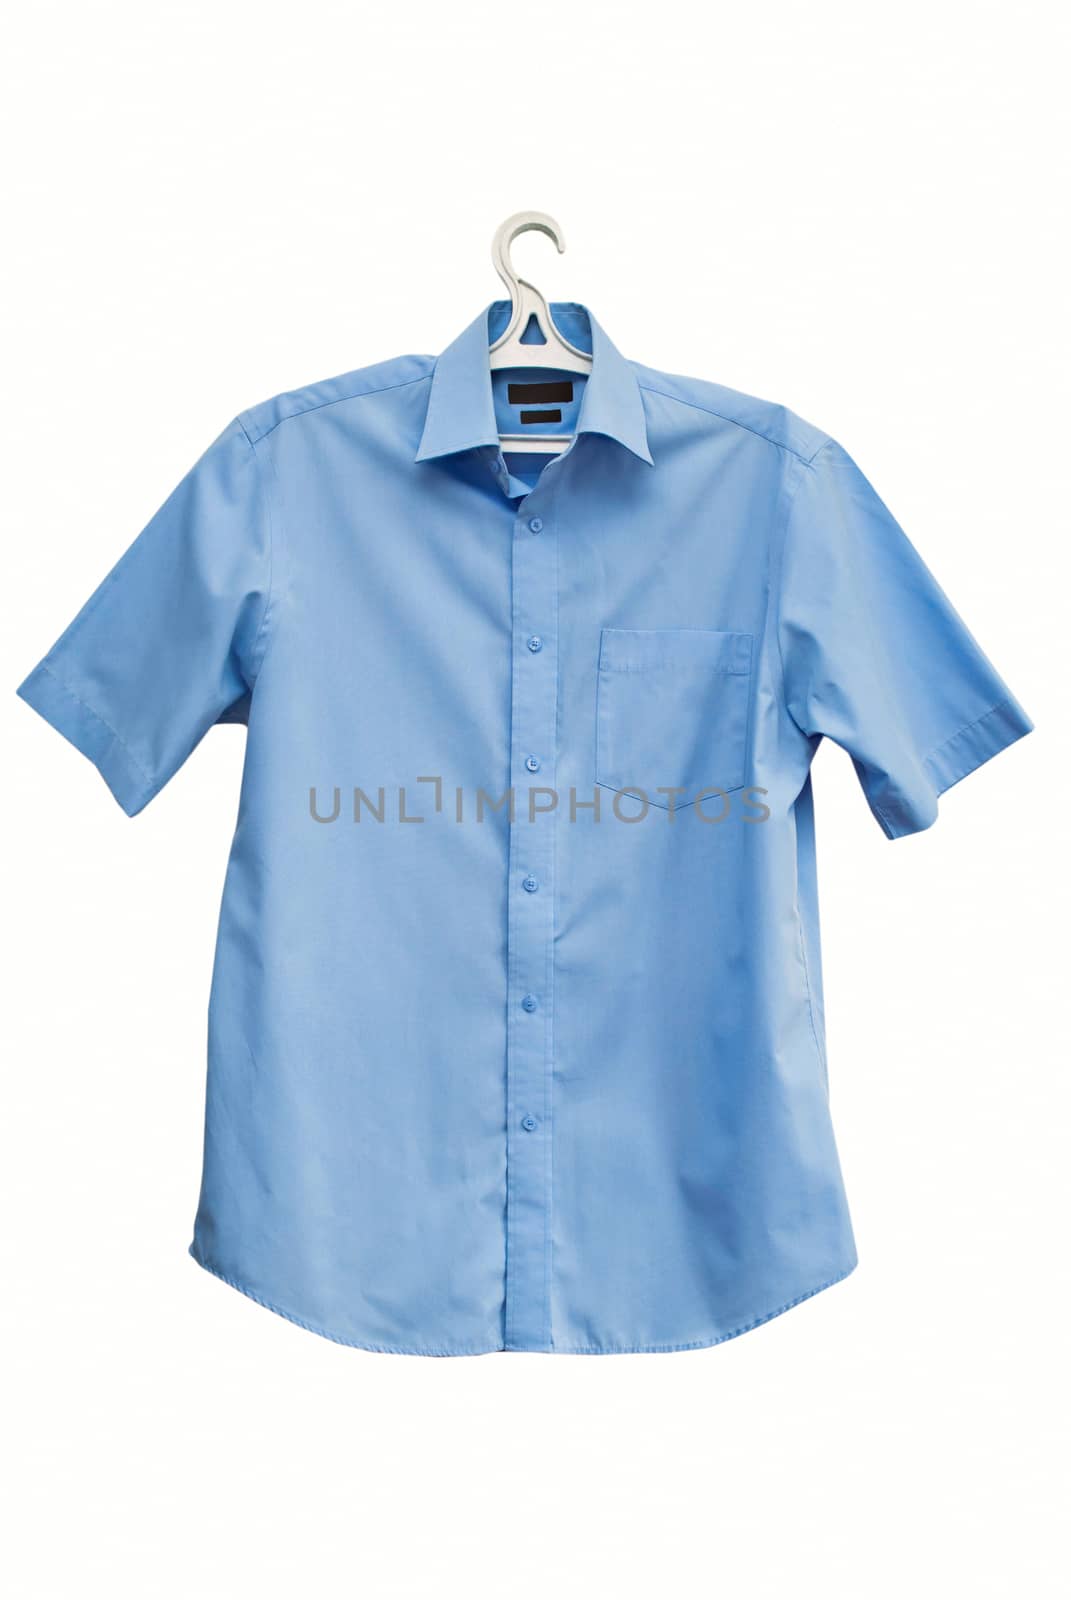 Summer shirt with short sleeves on a white background